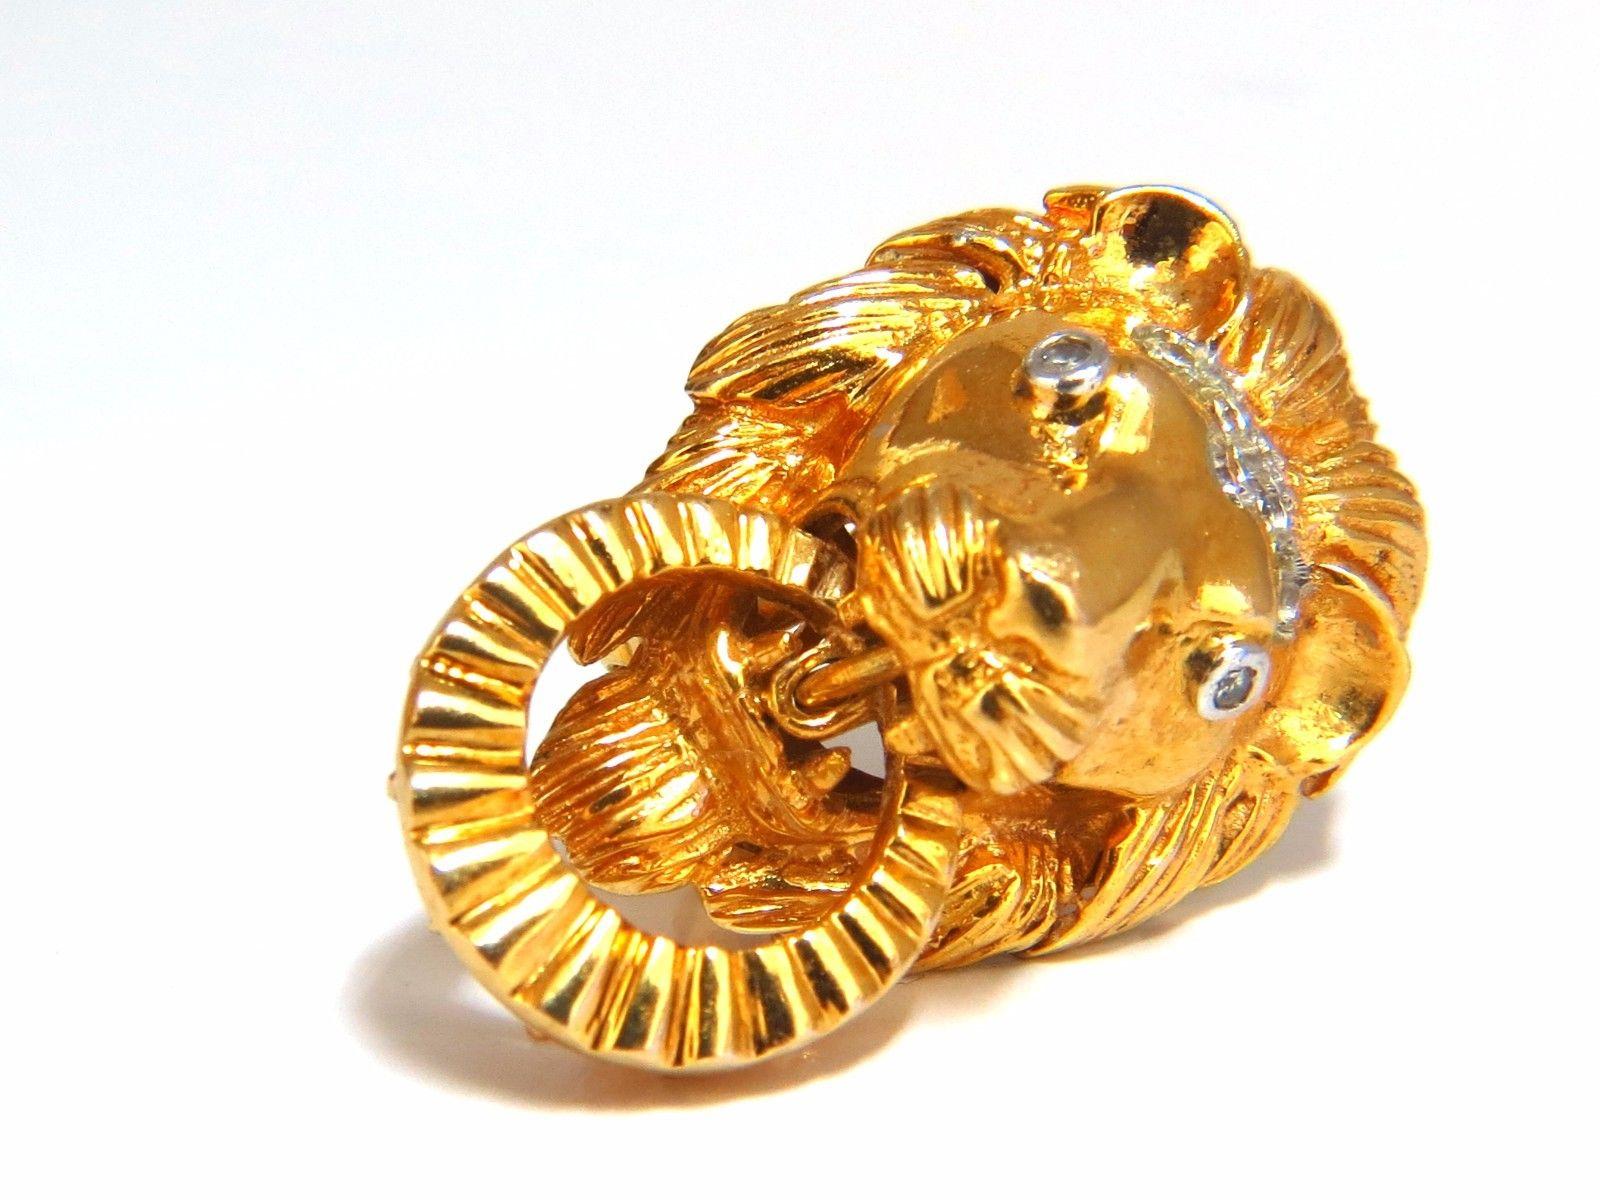 Vintage Lion Earrings

.30ct. Round cut natural diamonds

H-color

Vs-2 clarity.

22.2 grams.

18kt yellow gold

Overall: 1.1 X .76 inch

Depth: .53 inch

Ring within mouth is movable.

$4000 Appraisal Certificate to accompany

